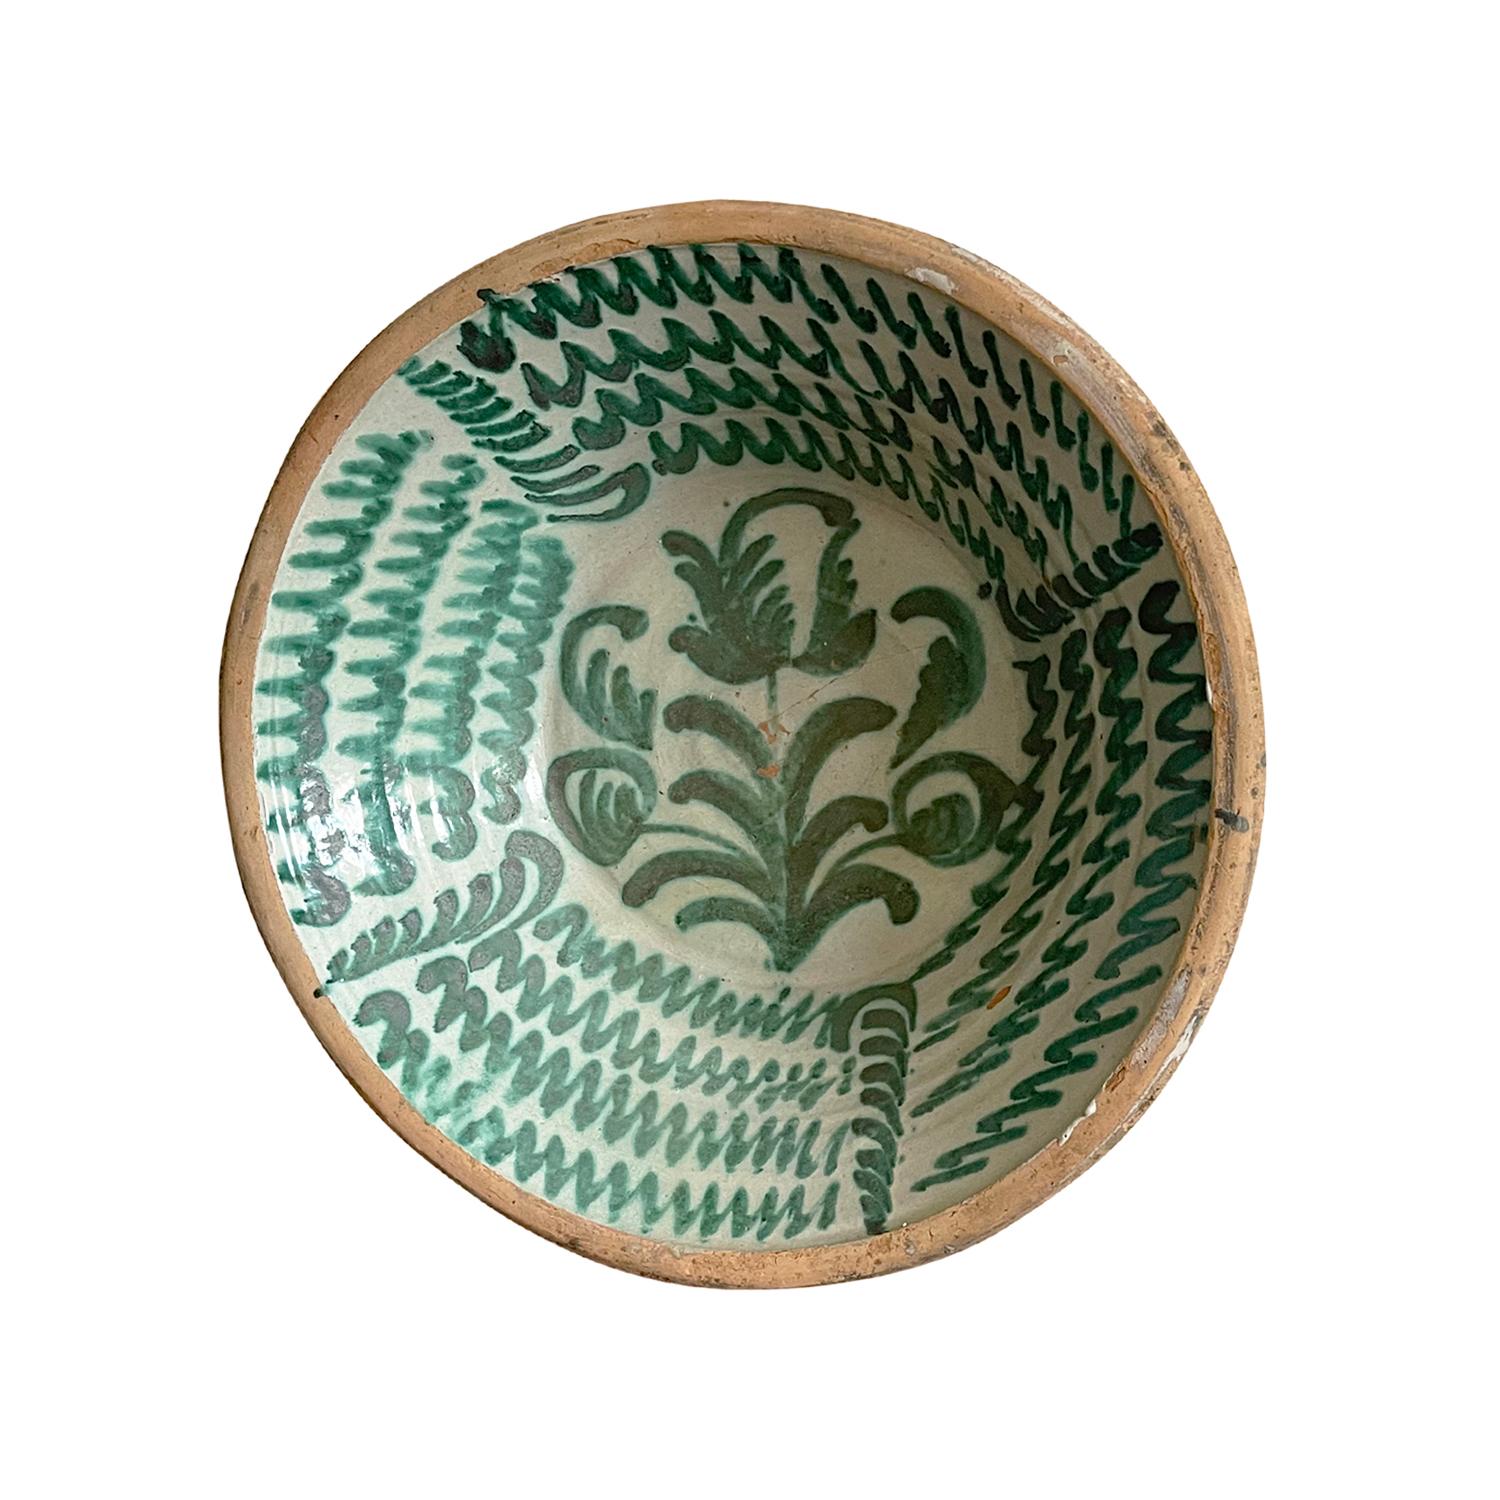 A large antique Spanish Lebrillo mixing bowl in earthenware, made of hand crafted terra cotta, originating from Granada, Spain. Featuring a glaze decoration in the typical Morisco green over a milk-white glaze. A floral motif is painted onto the